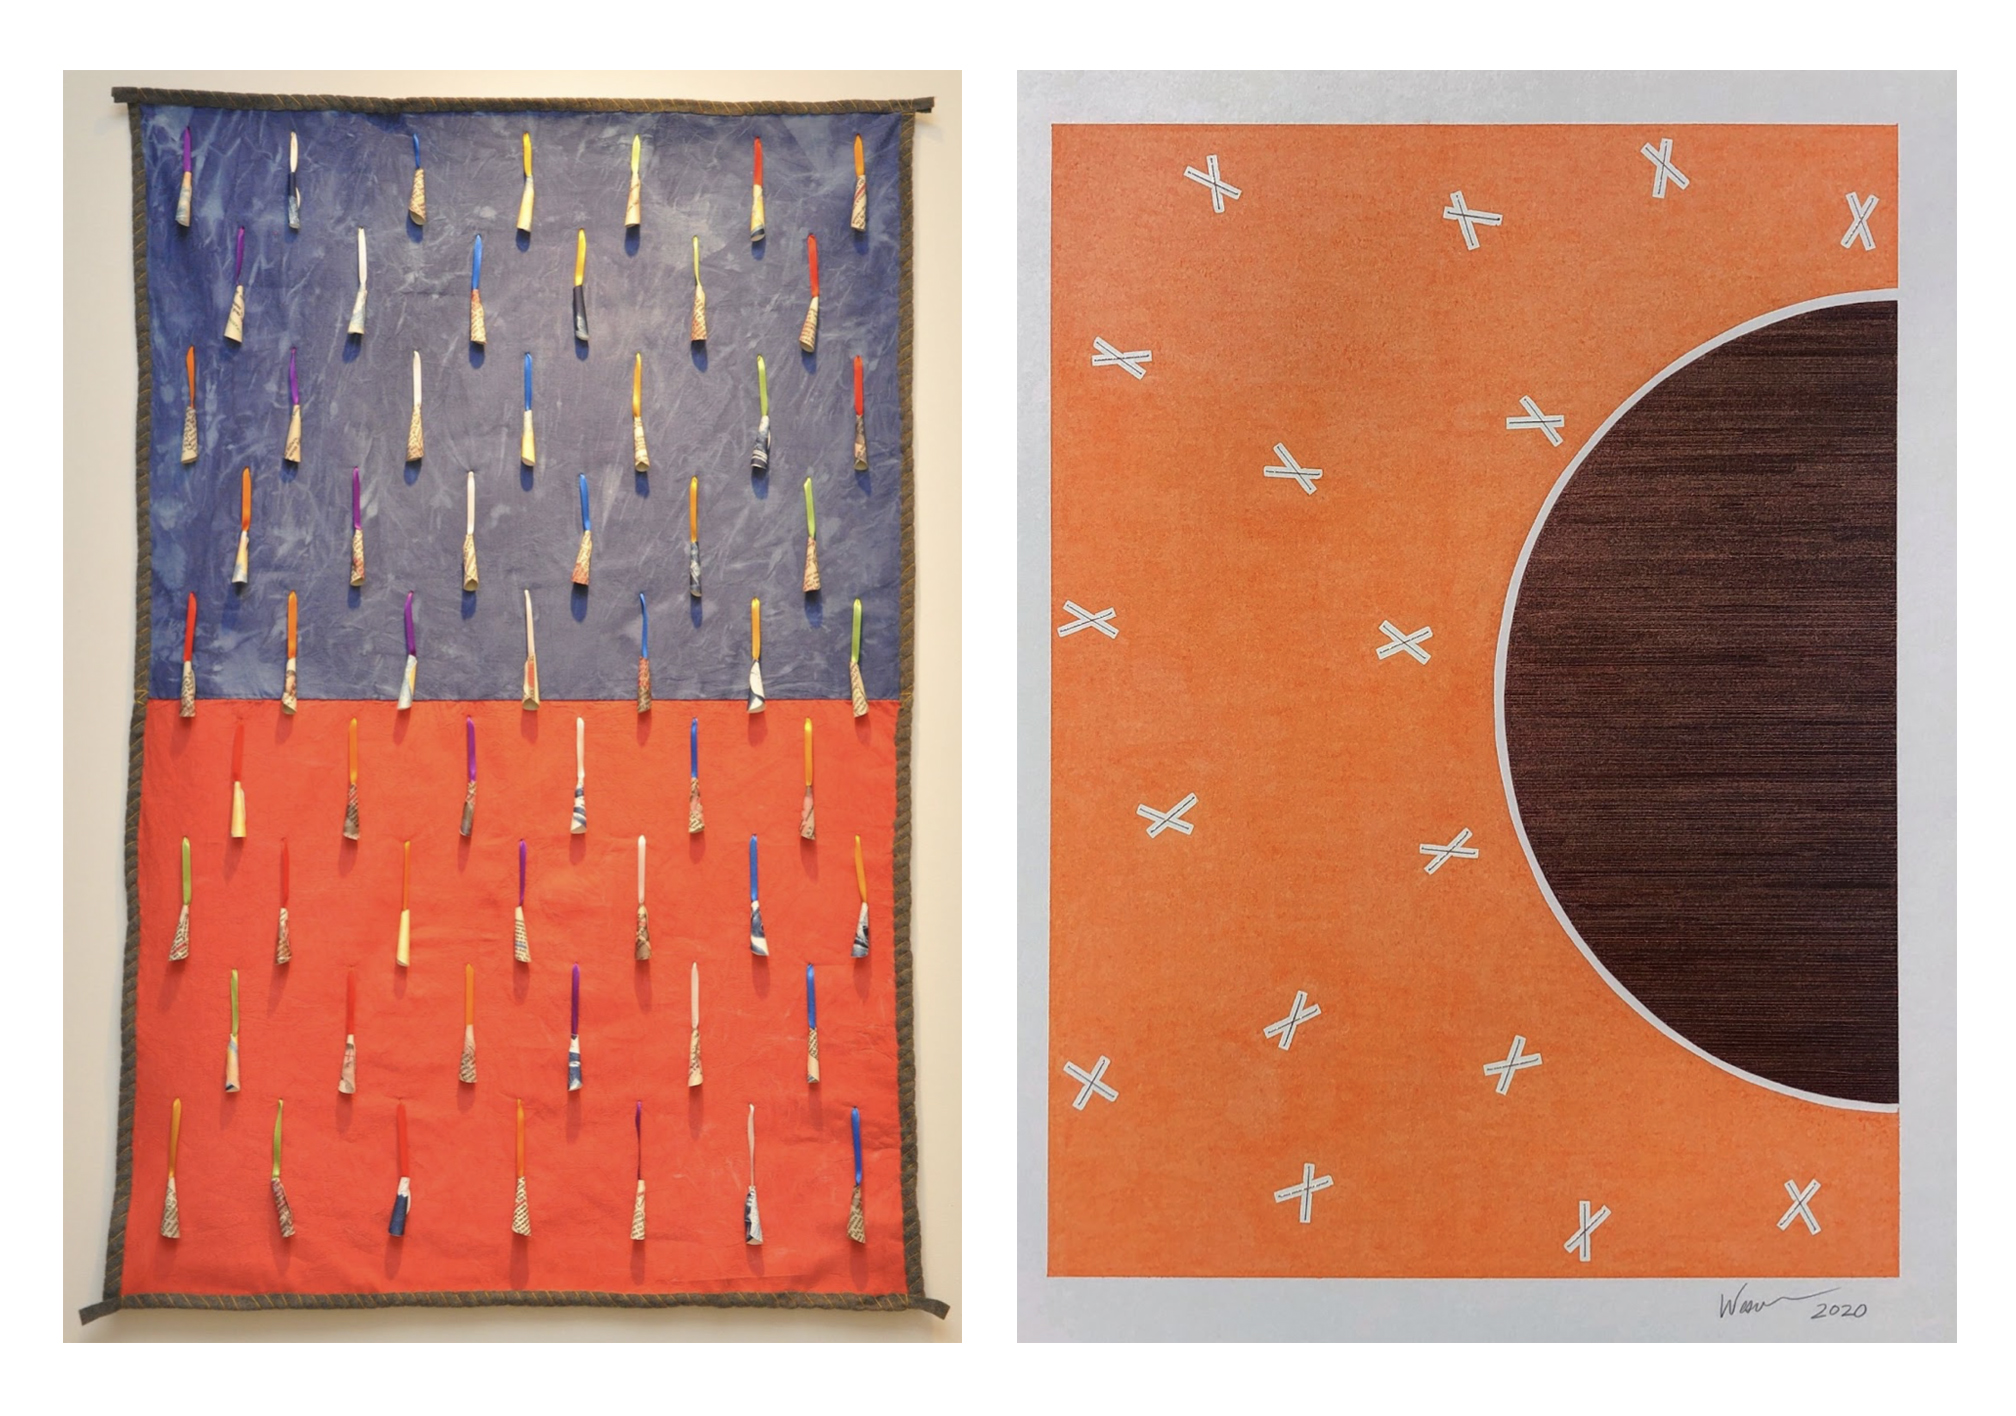 Left: Jason Wesaw (Potawatomi), Healing Blanket, 2014, Hand dyed and hand sewn muslin, flannel, transfer prints on Rives bfk, poly ribbon, sinew, oil pastel, 40 x 60 inches. Right: Jason Wesaw (Potawatomi), Morning song for the sun and fire spirits, 2020, Oil pastel and copper leaf on incised, deckled edge paper, embroidered with copper thread.